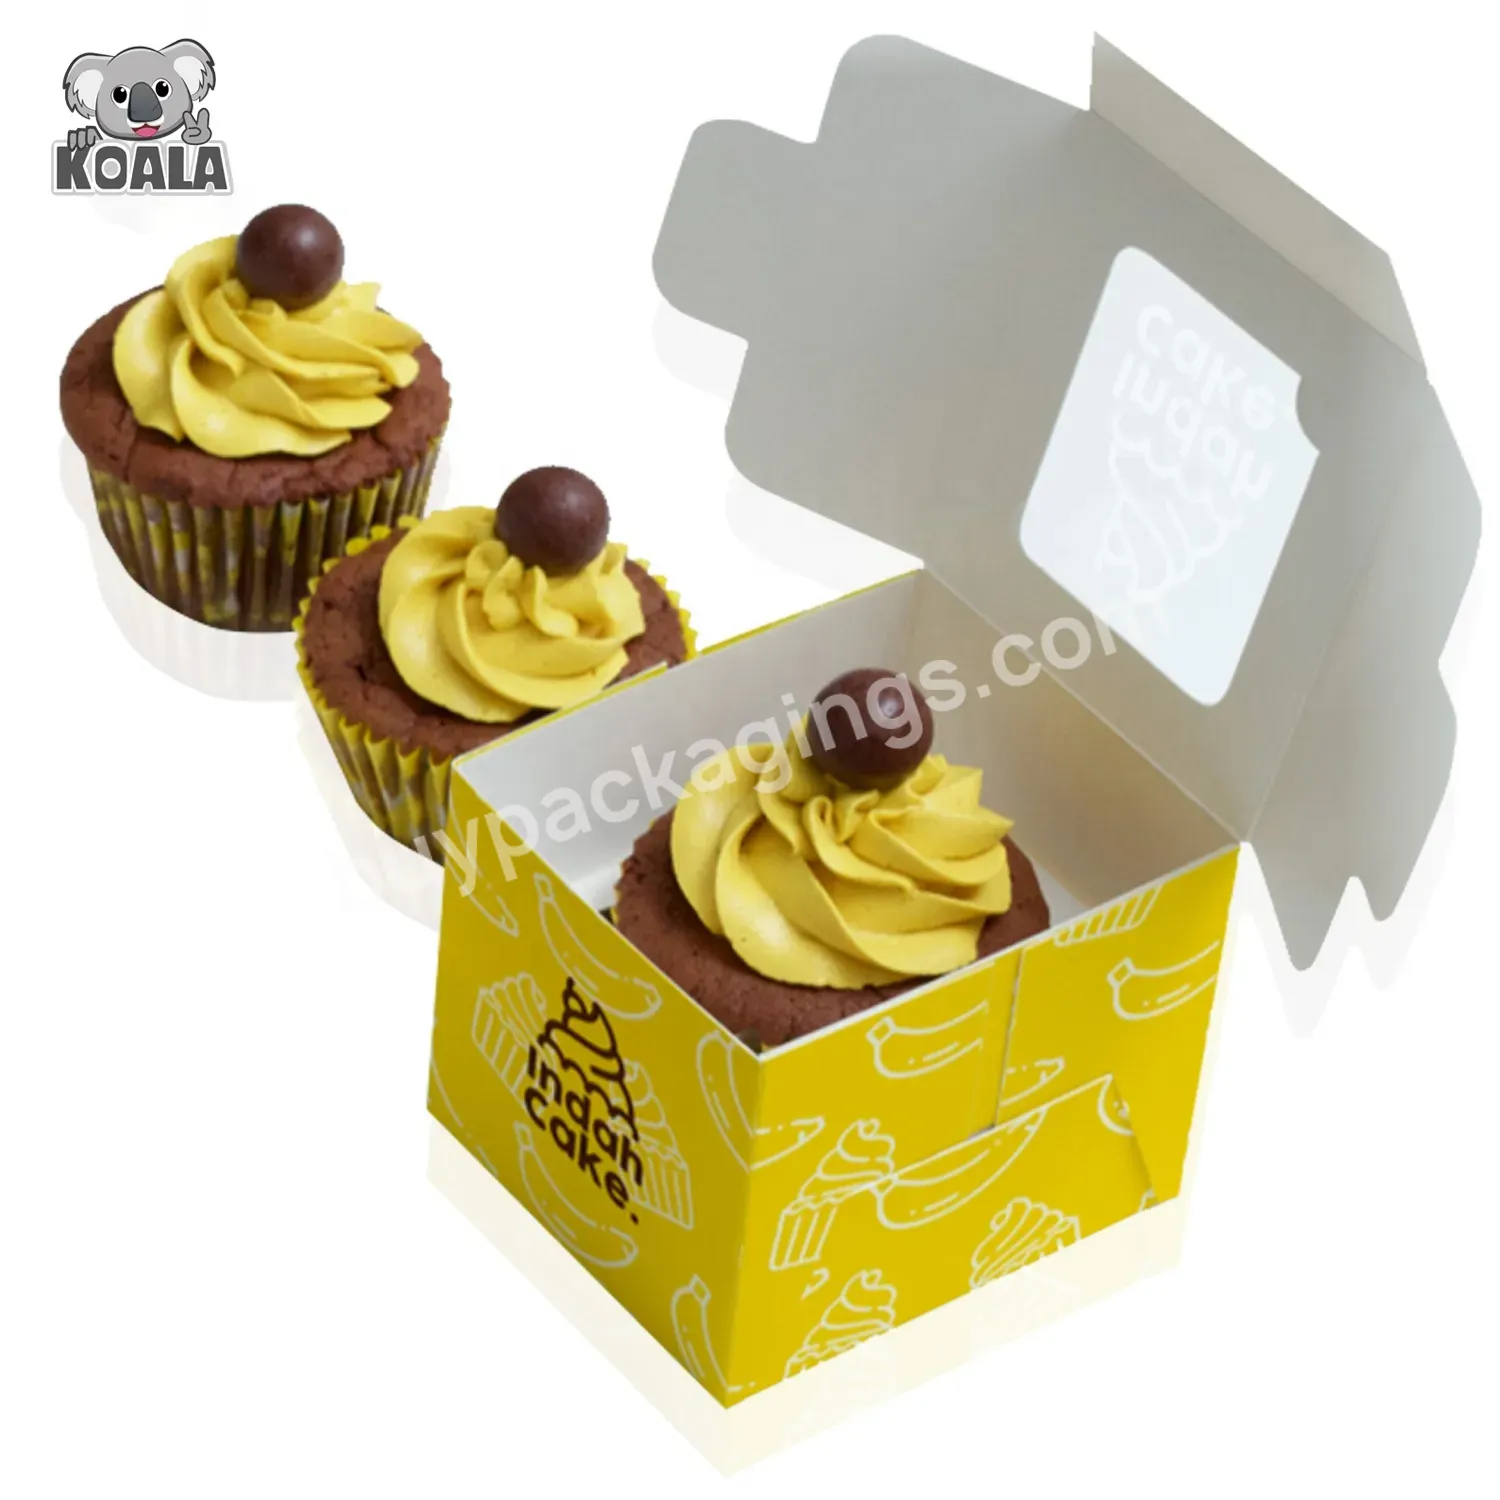 Wholesale Best Price Cookie Folding Eco Friendly Cakes And Cupcakes Pastry Paper Packaging Box With Clear Lid Windows